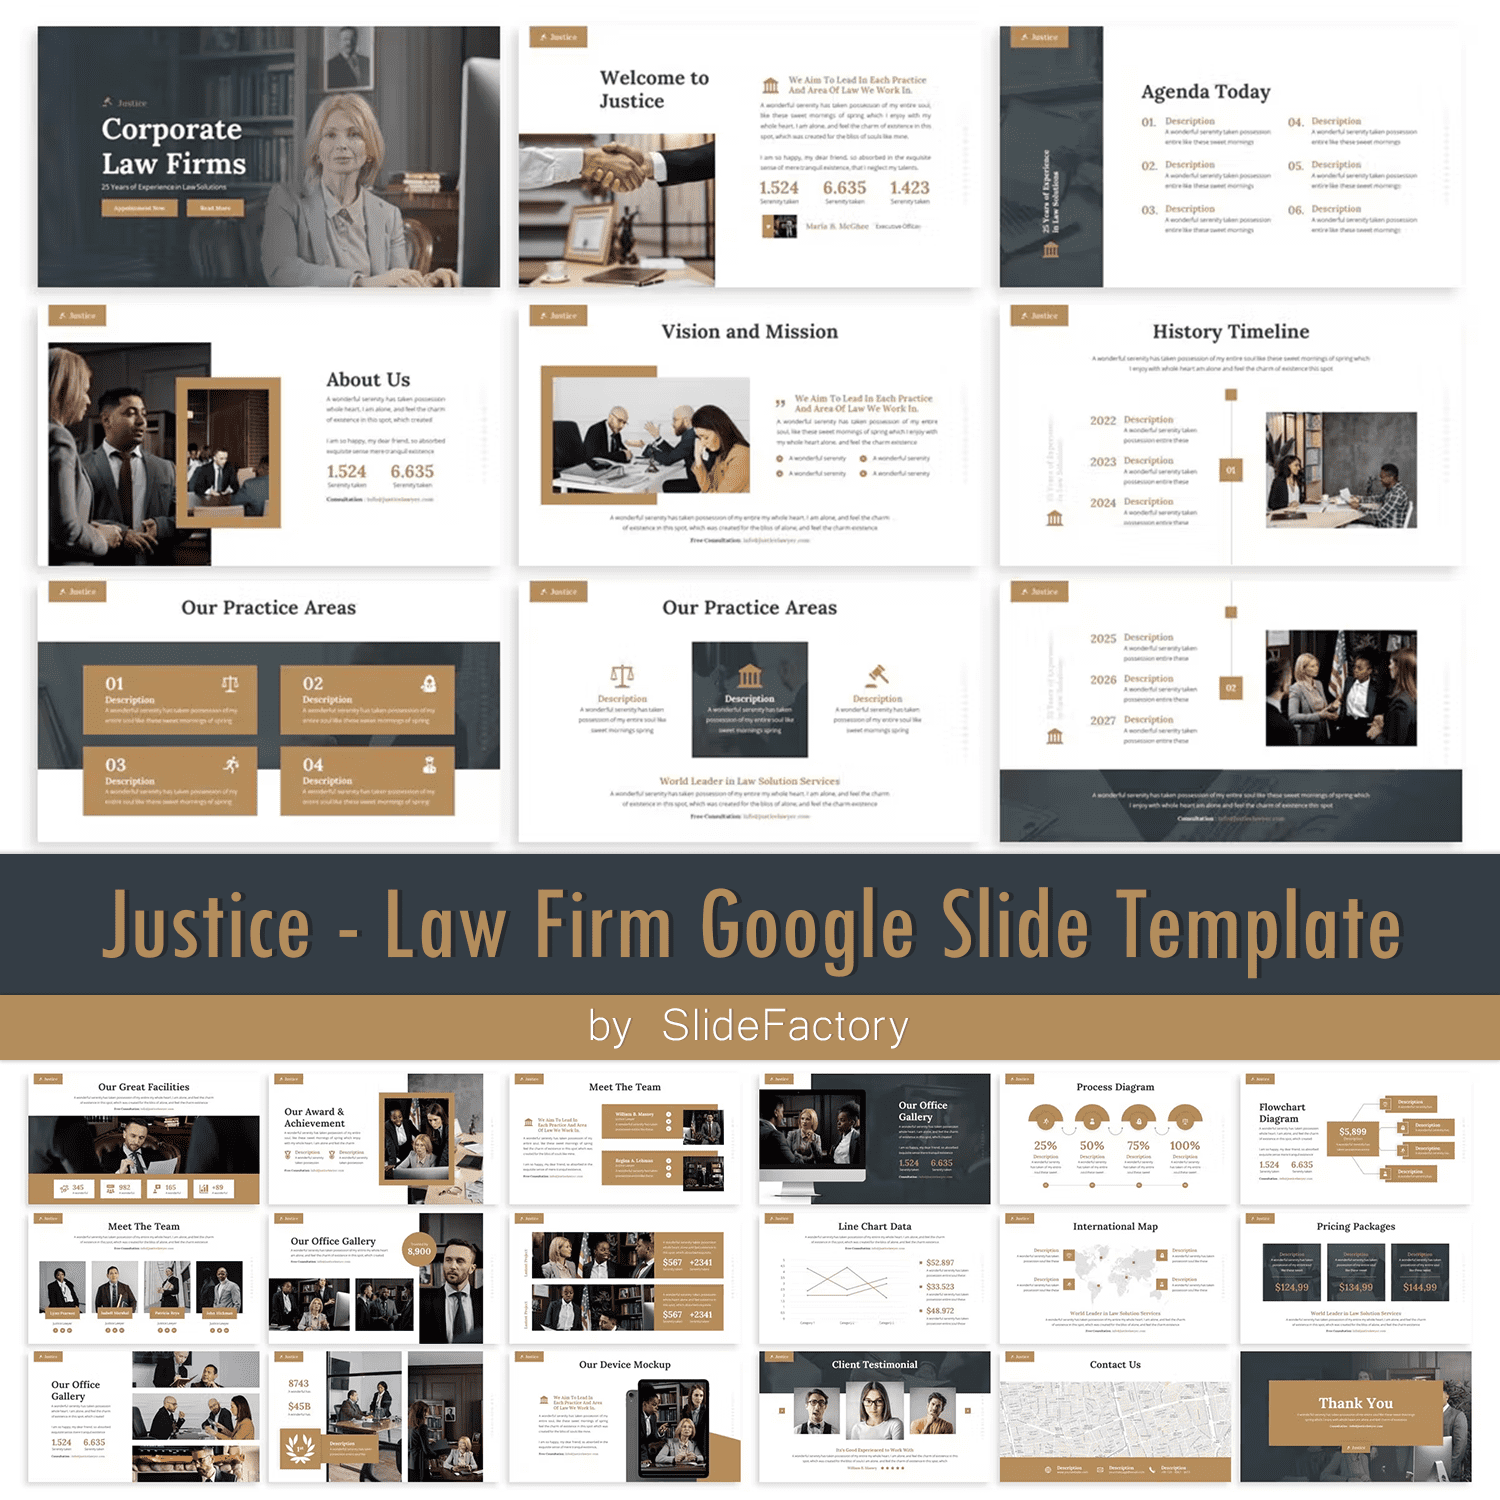 Preview justice law firm google slide template.